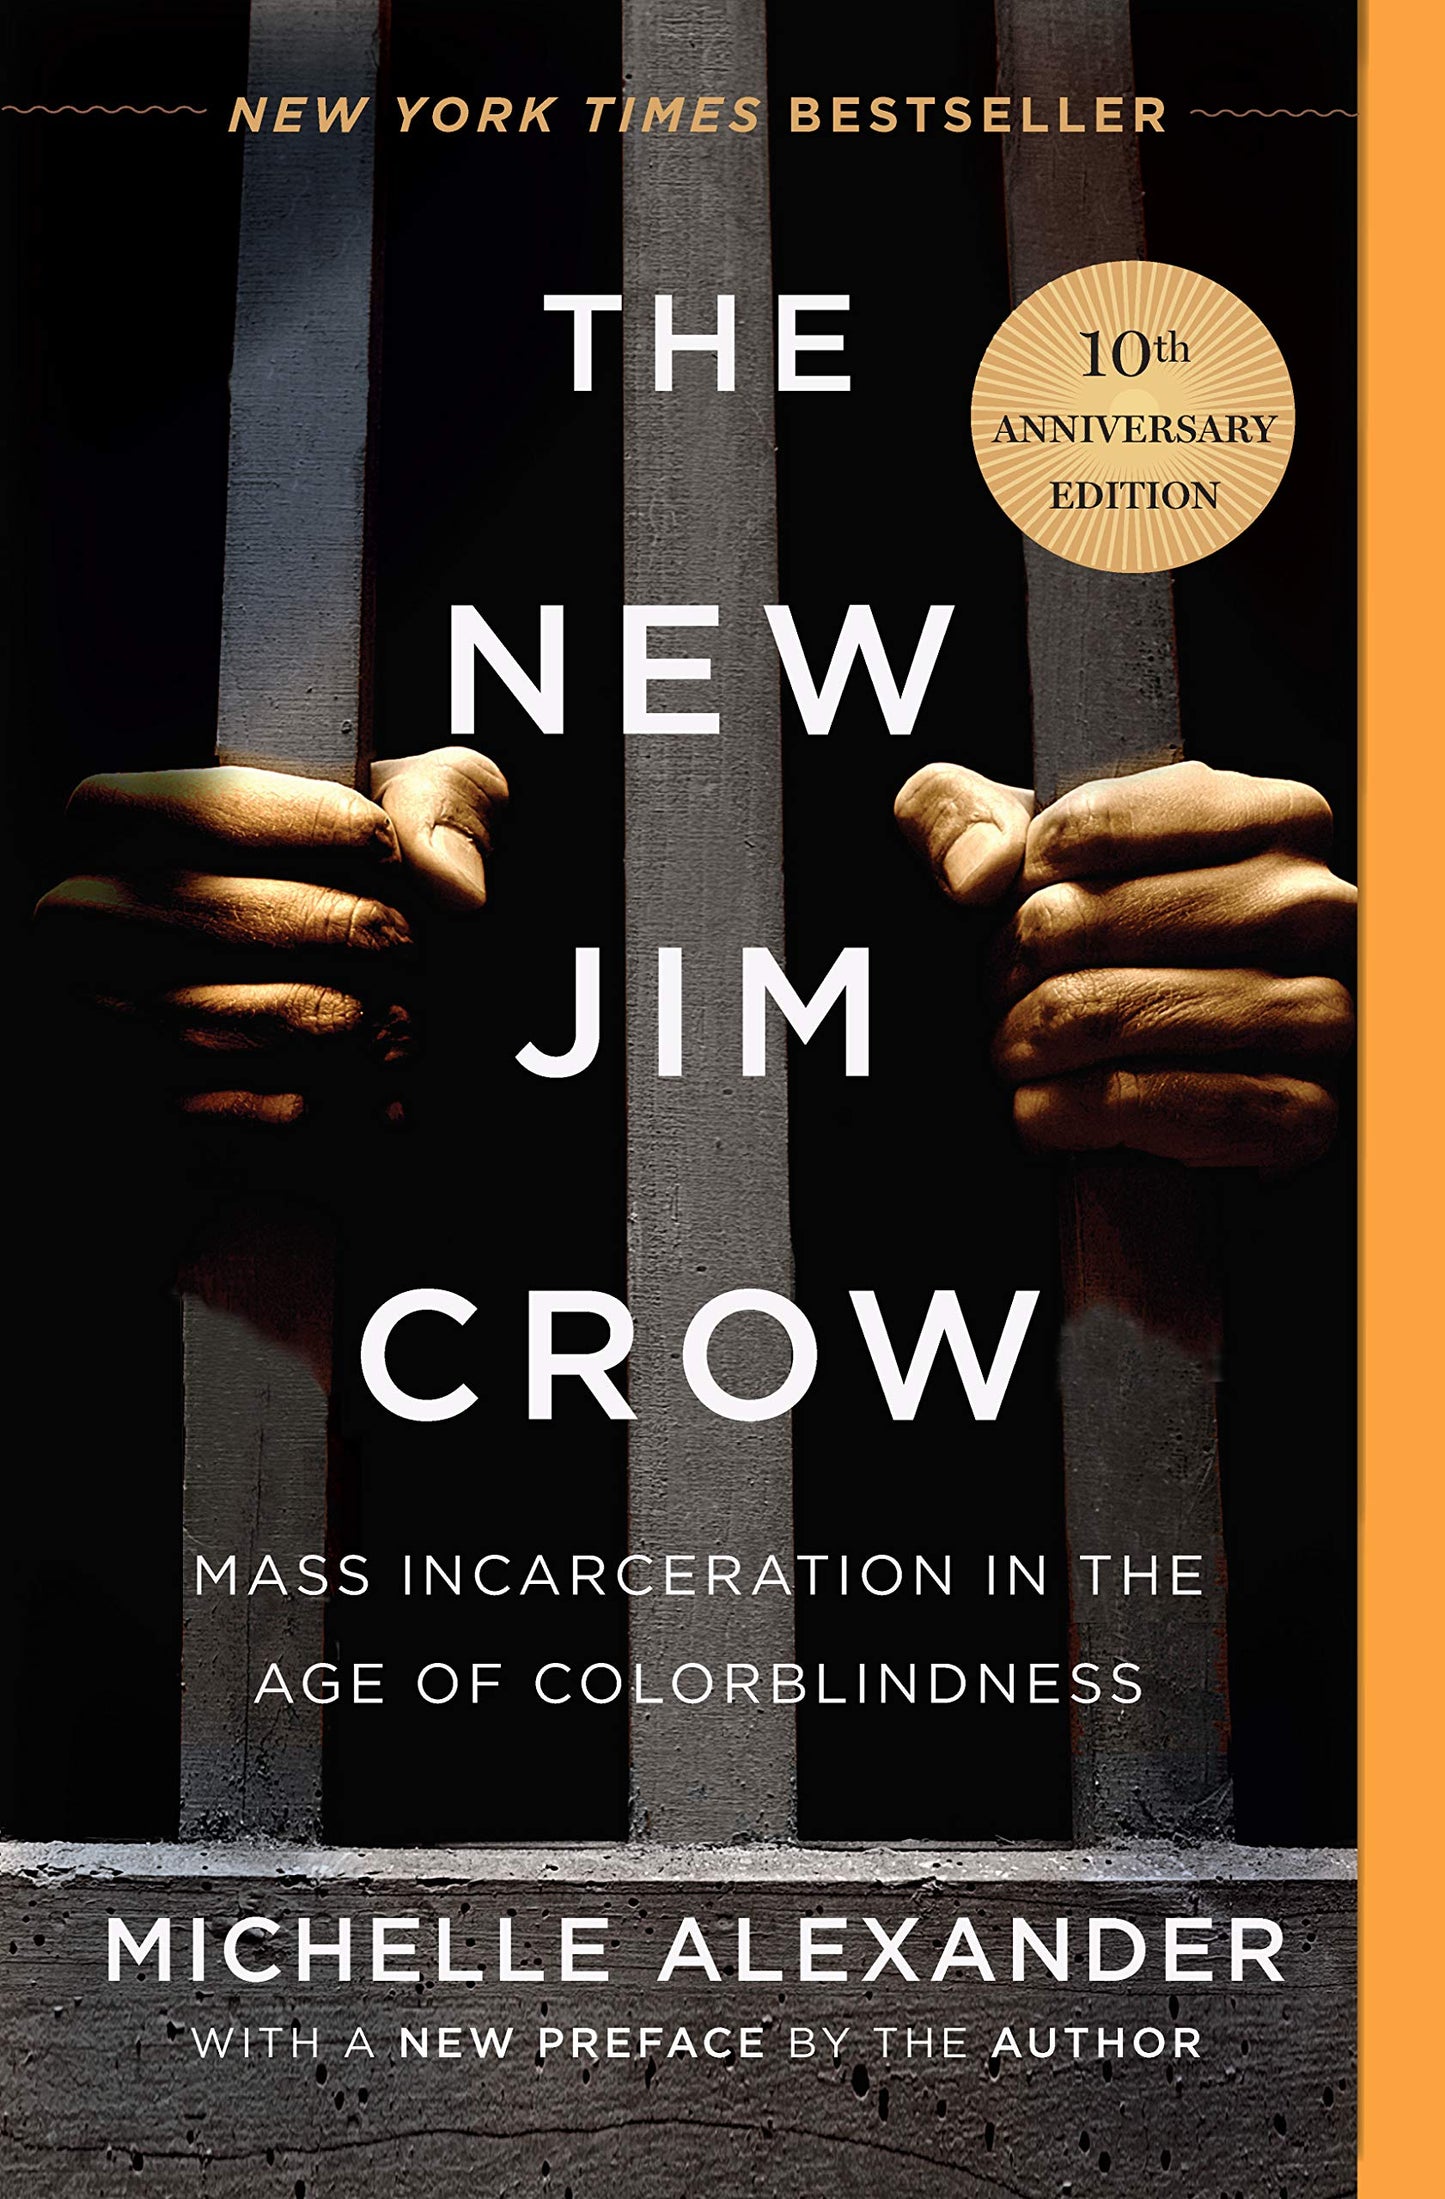 The New Jim Crow // Mass Incarceration in the Age of Colorblindness